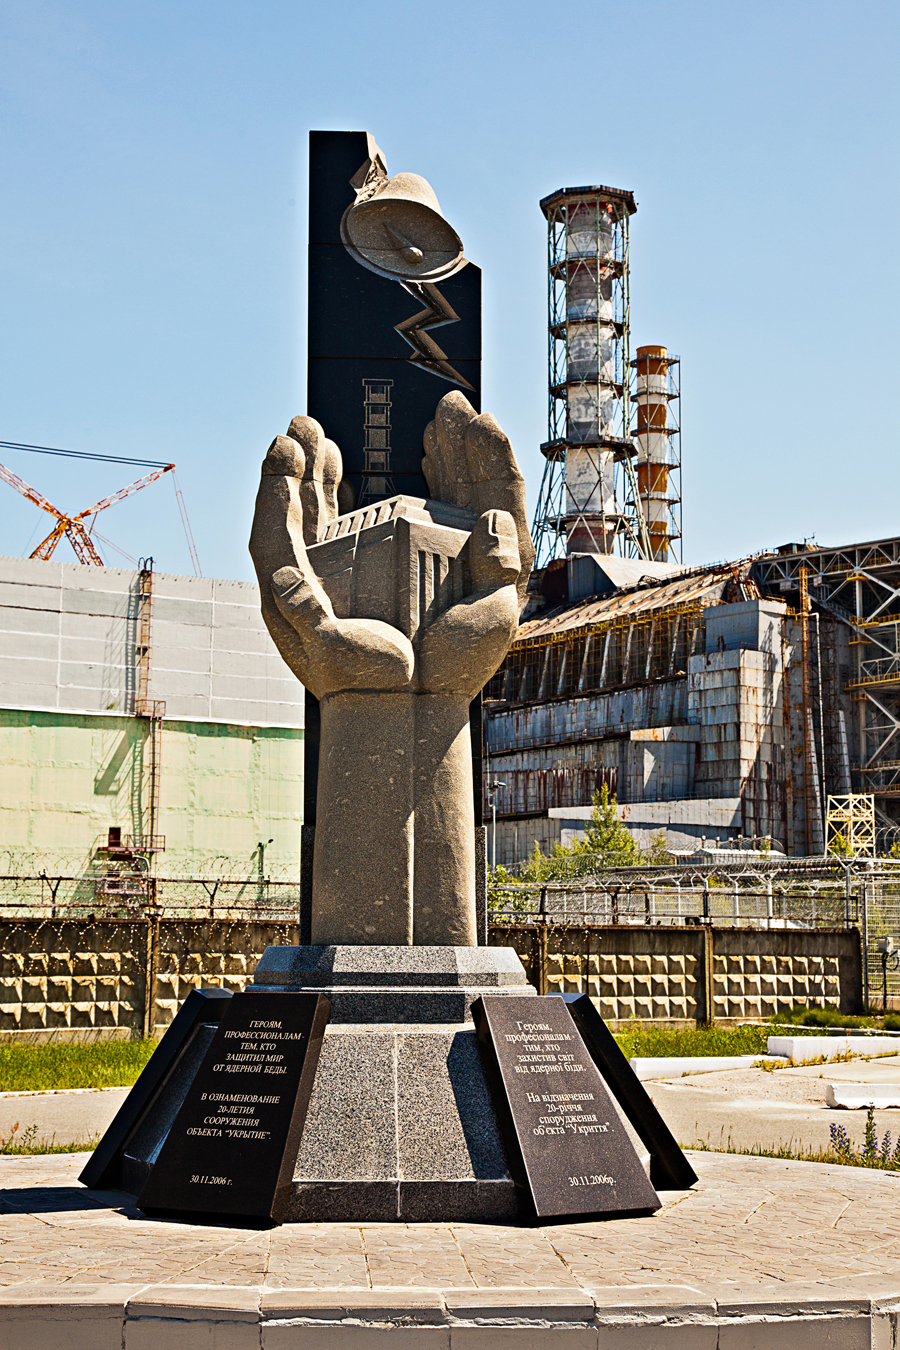 Chernobyl Memorial at the Power Plant